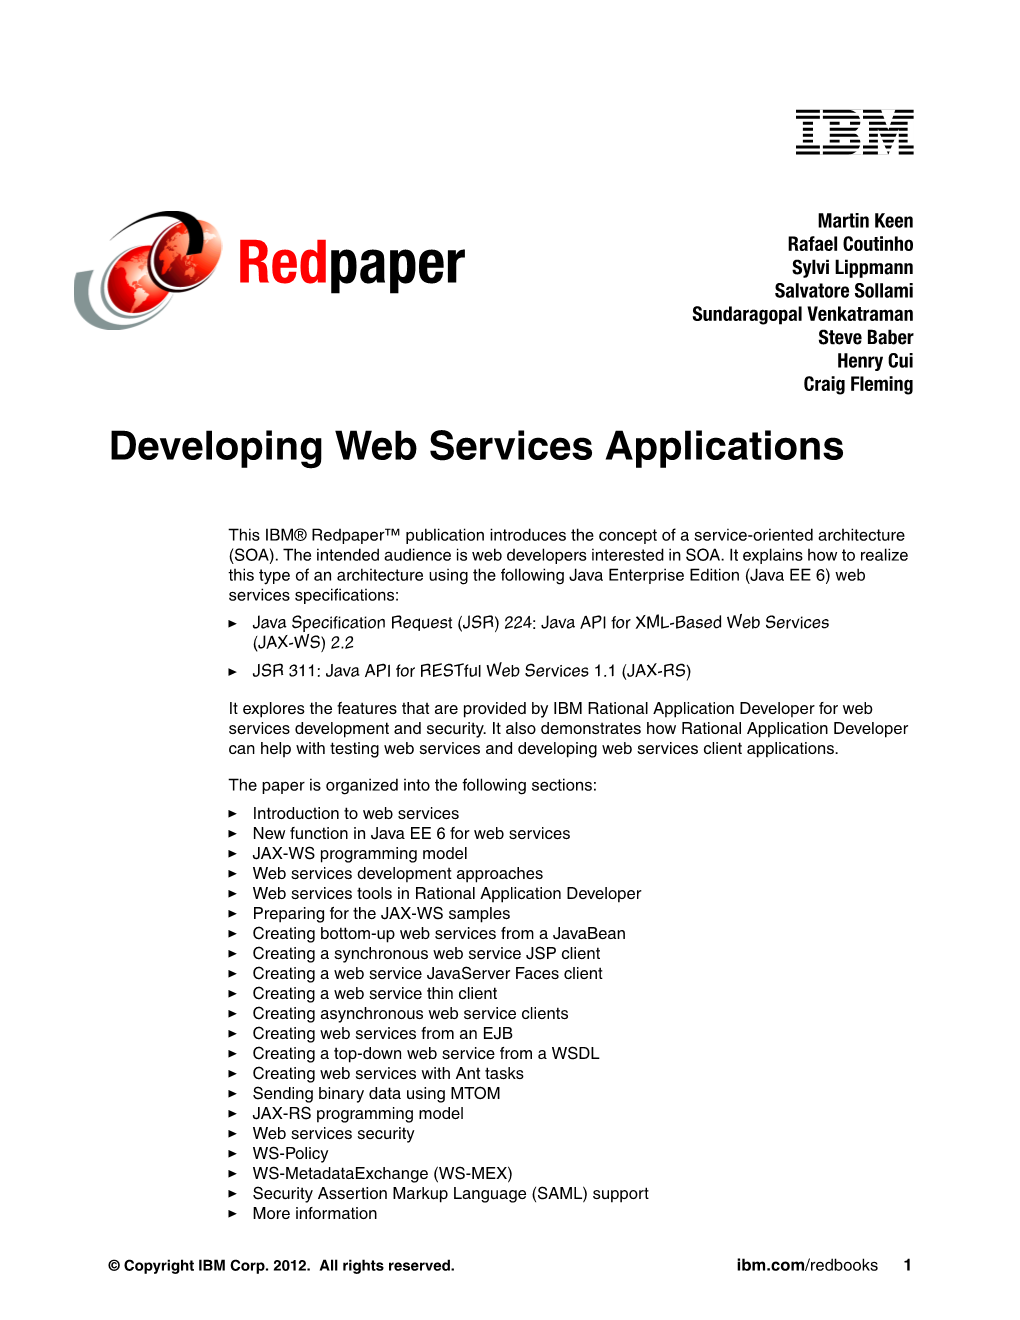 Developing Web Services Applications